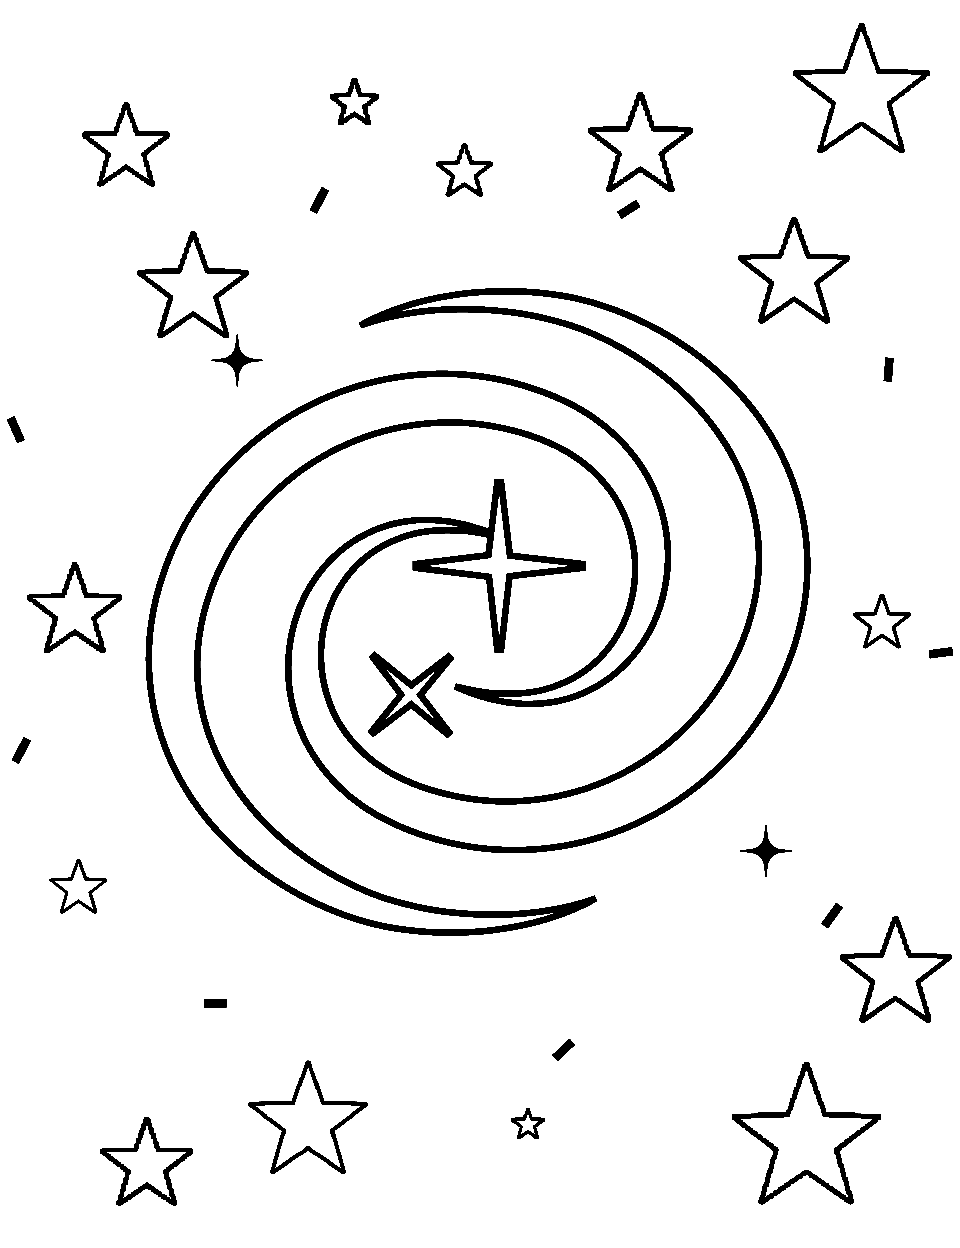 Kindergarten Galaxy Gaze Coloring Page - A simple galaxy design with bold colors, suitable for kindergarteners.